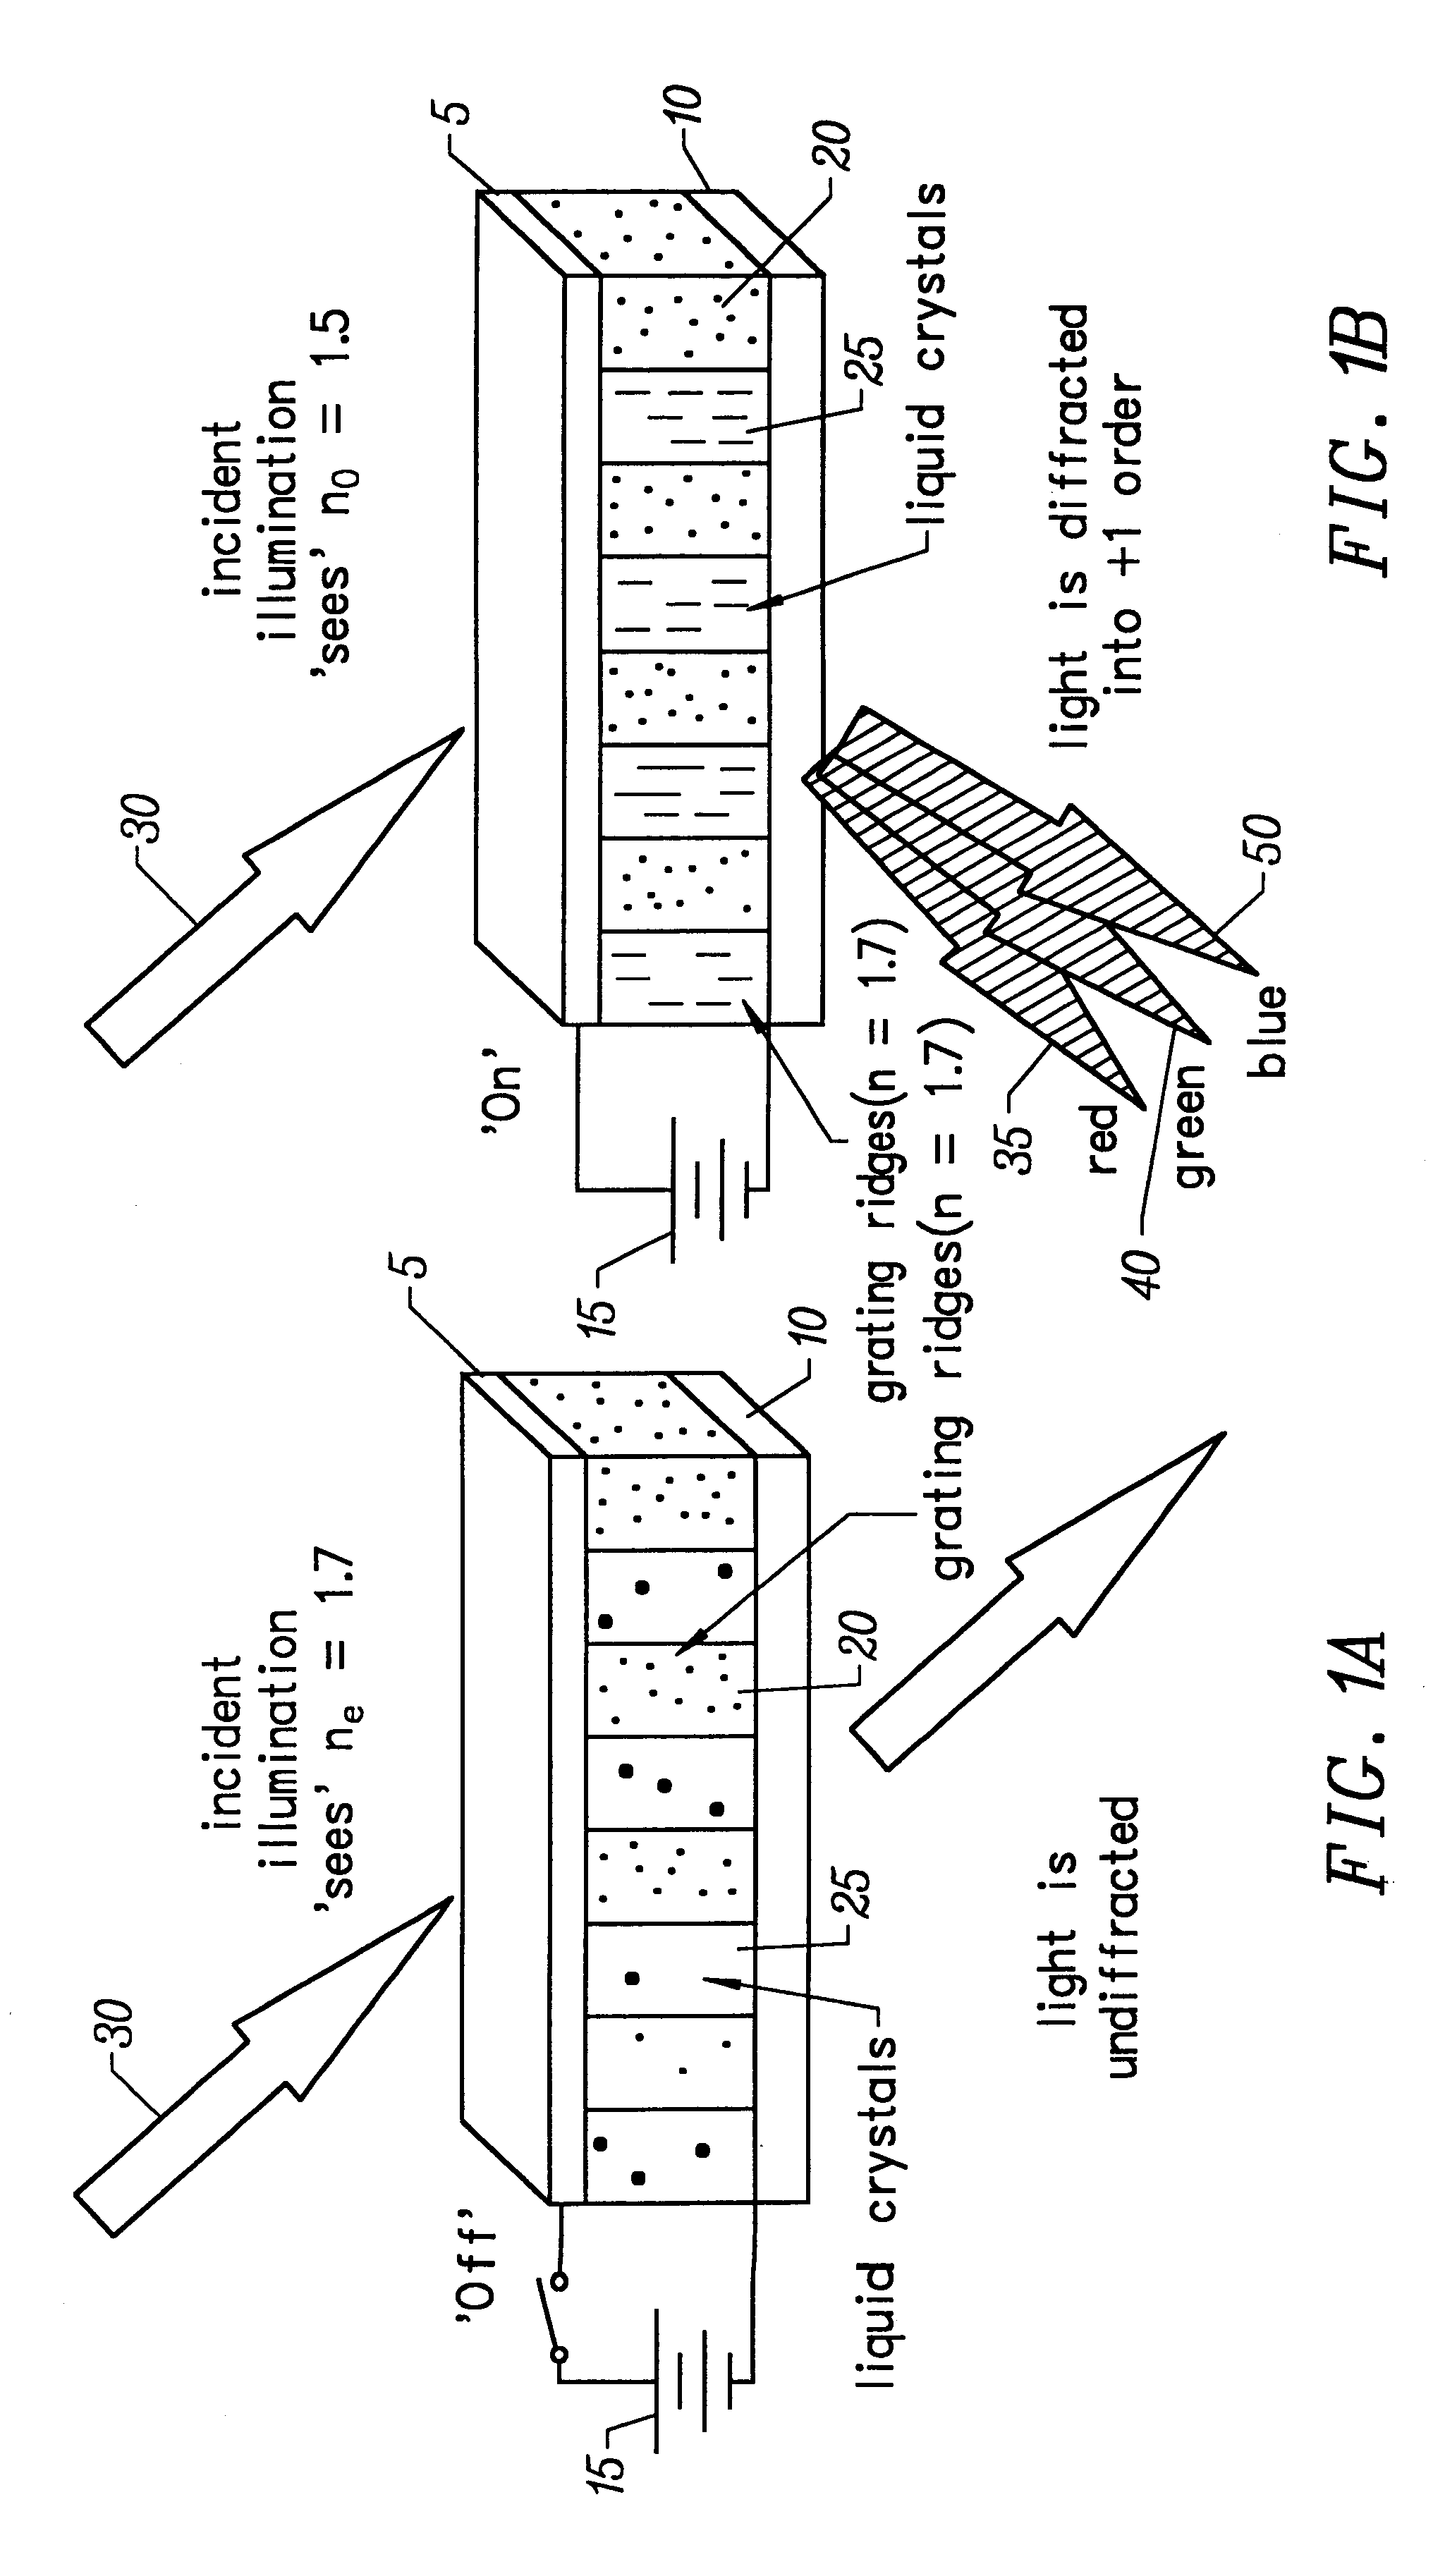 Method and apparatus for forming optical gratings